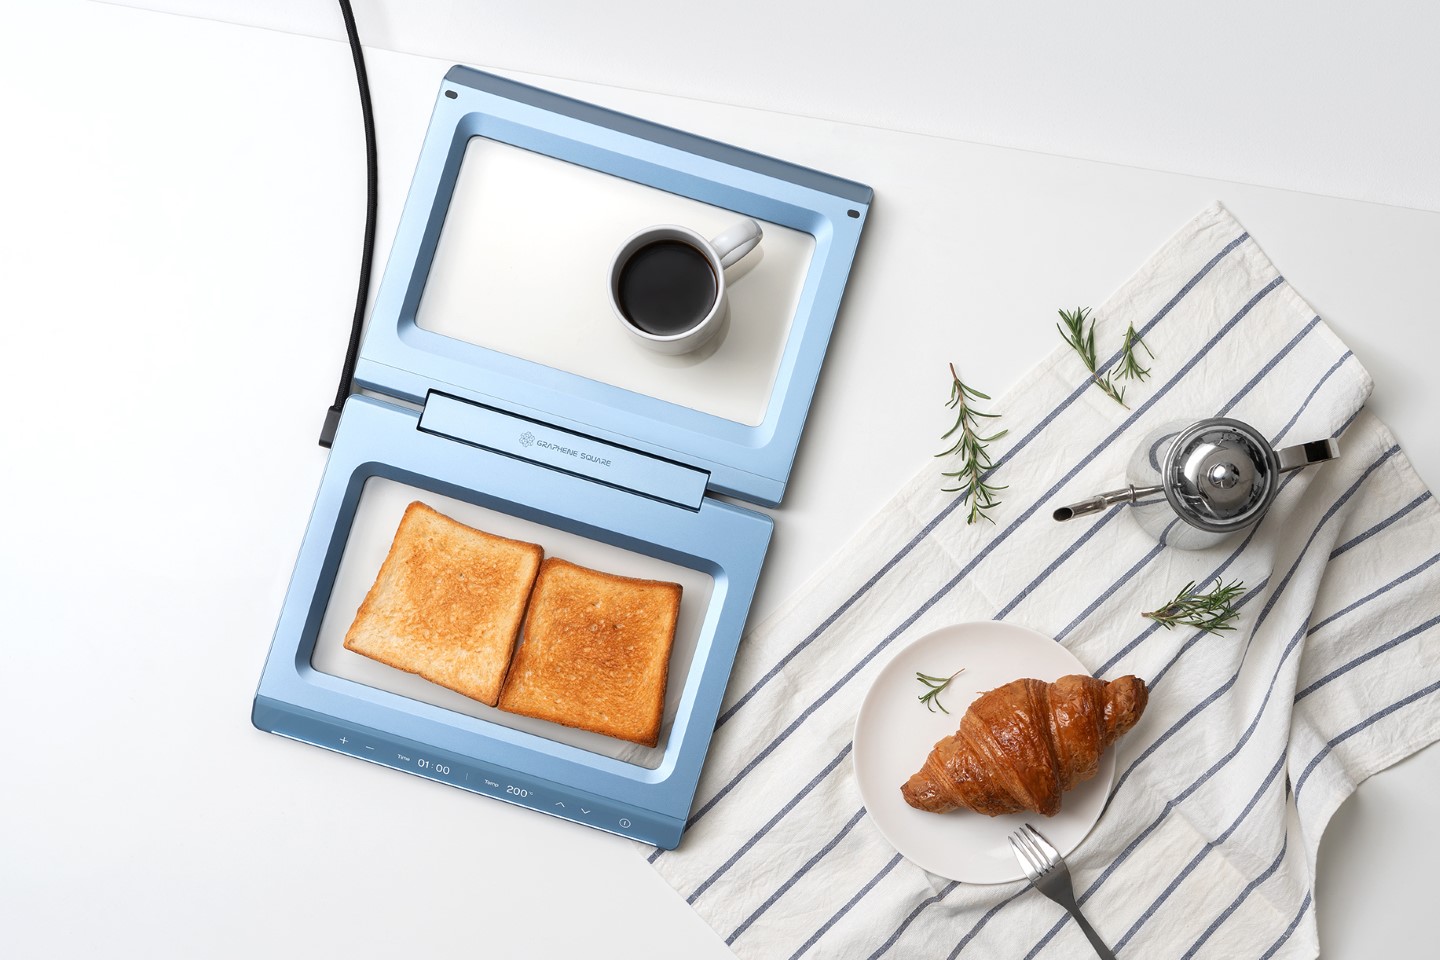 #See-through toaster concept uses graphene-lined sheets of glass to toast your bread slices in plain sight